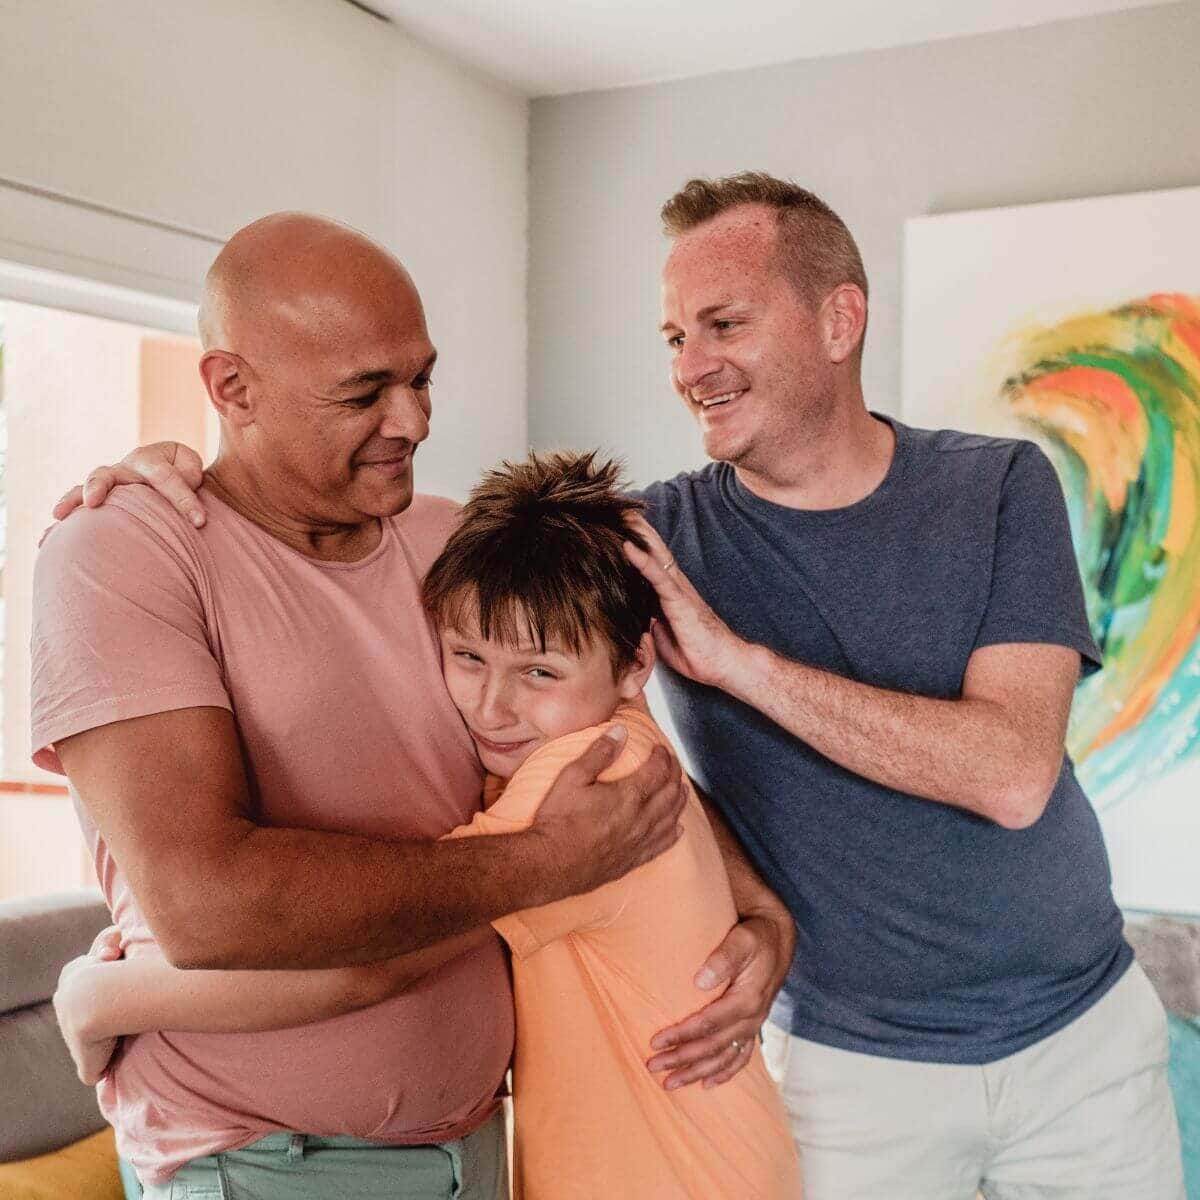 Two men are standing in a living room. One man has his arm around the other man's shoulder while he is hugging a boy that is between them.